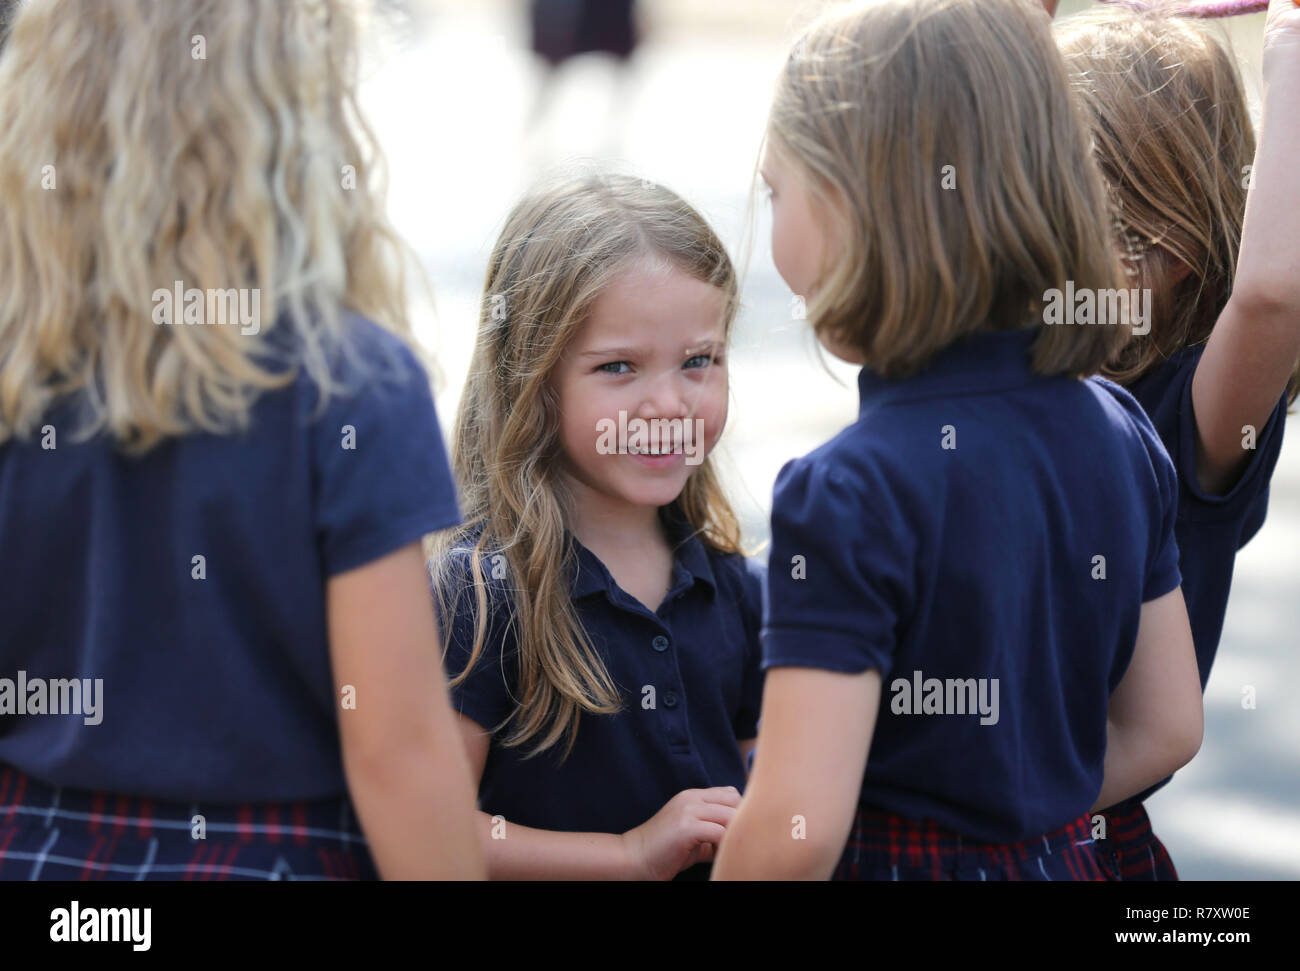 Primary school children and scenes at a religious Catholic school in the Chicago area in 2018. Stock Photo